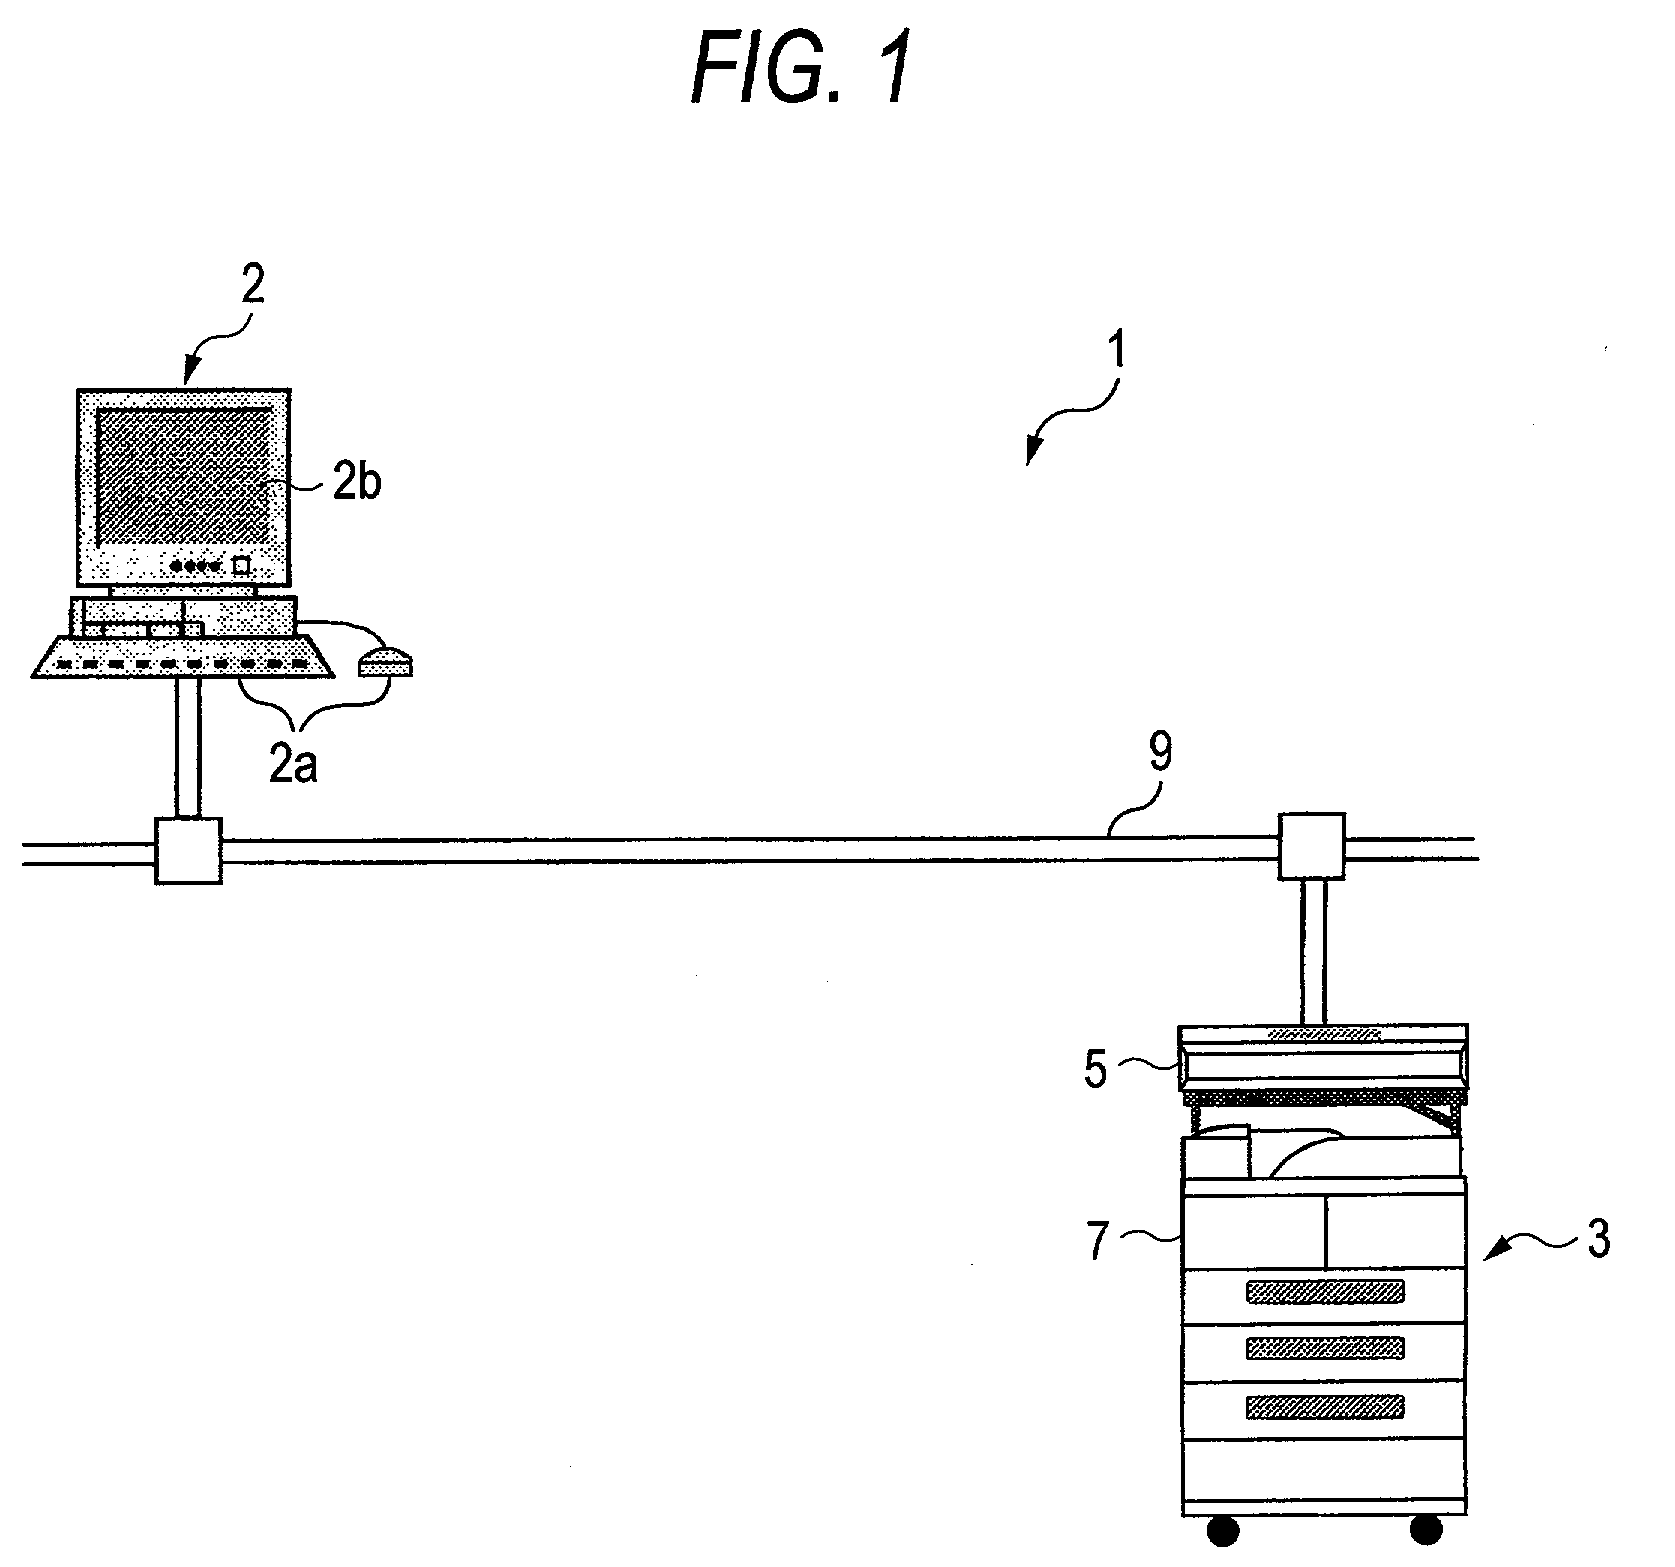 Image generating method, device and program, and illicit copying prevention system